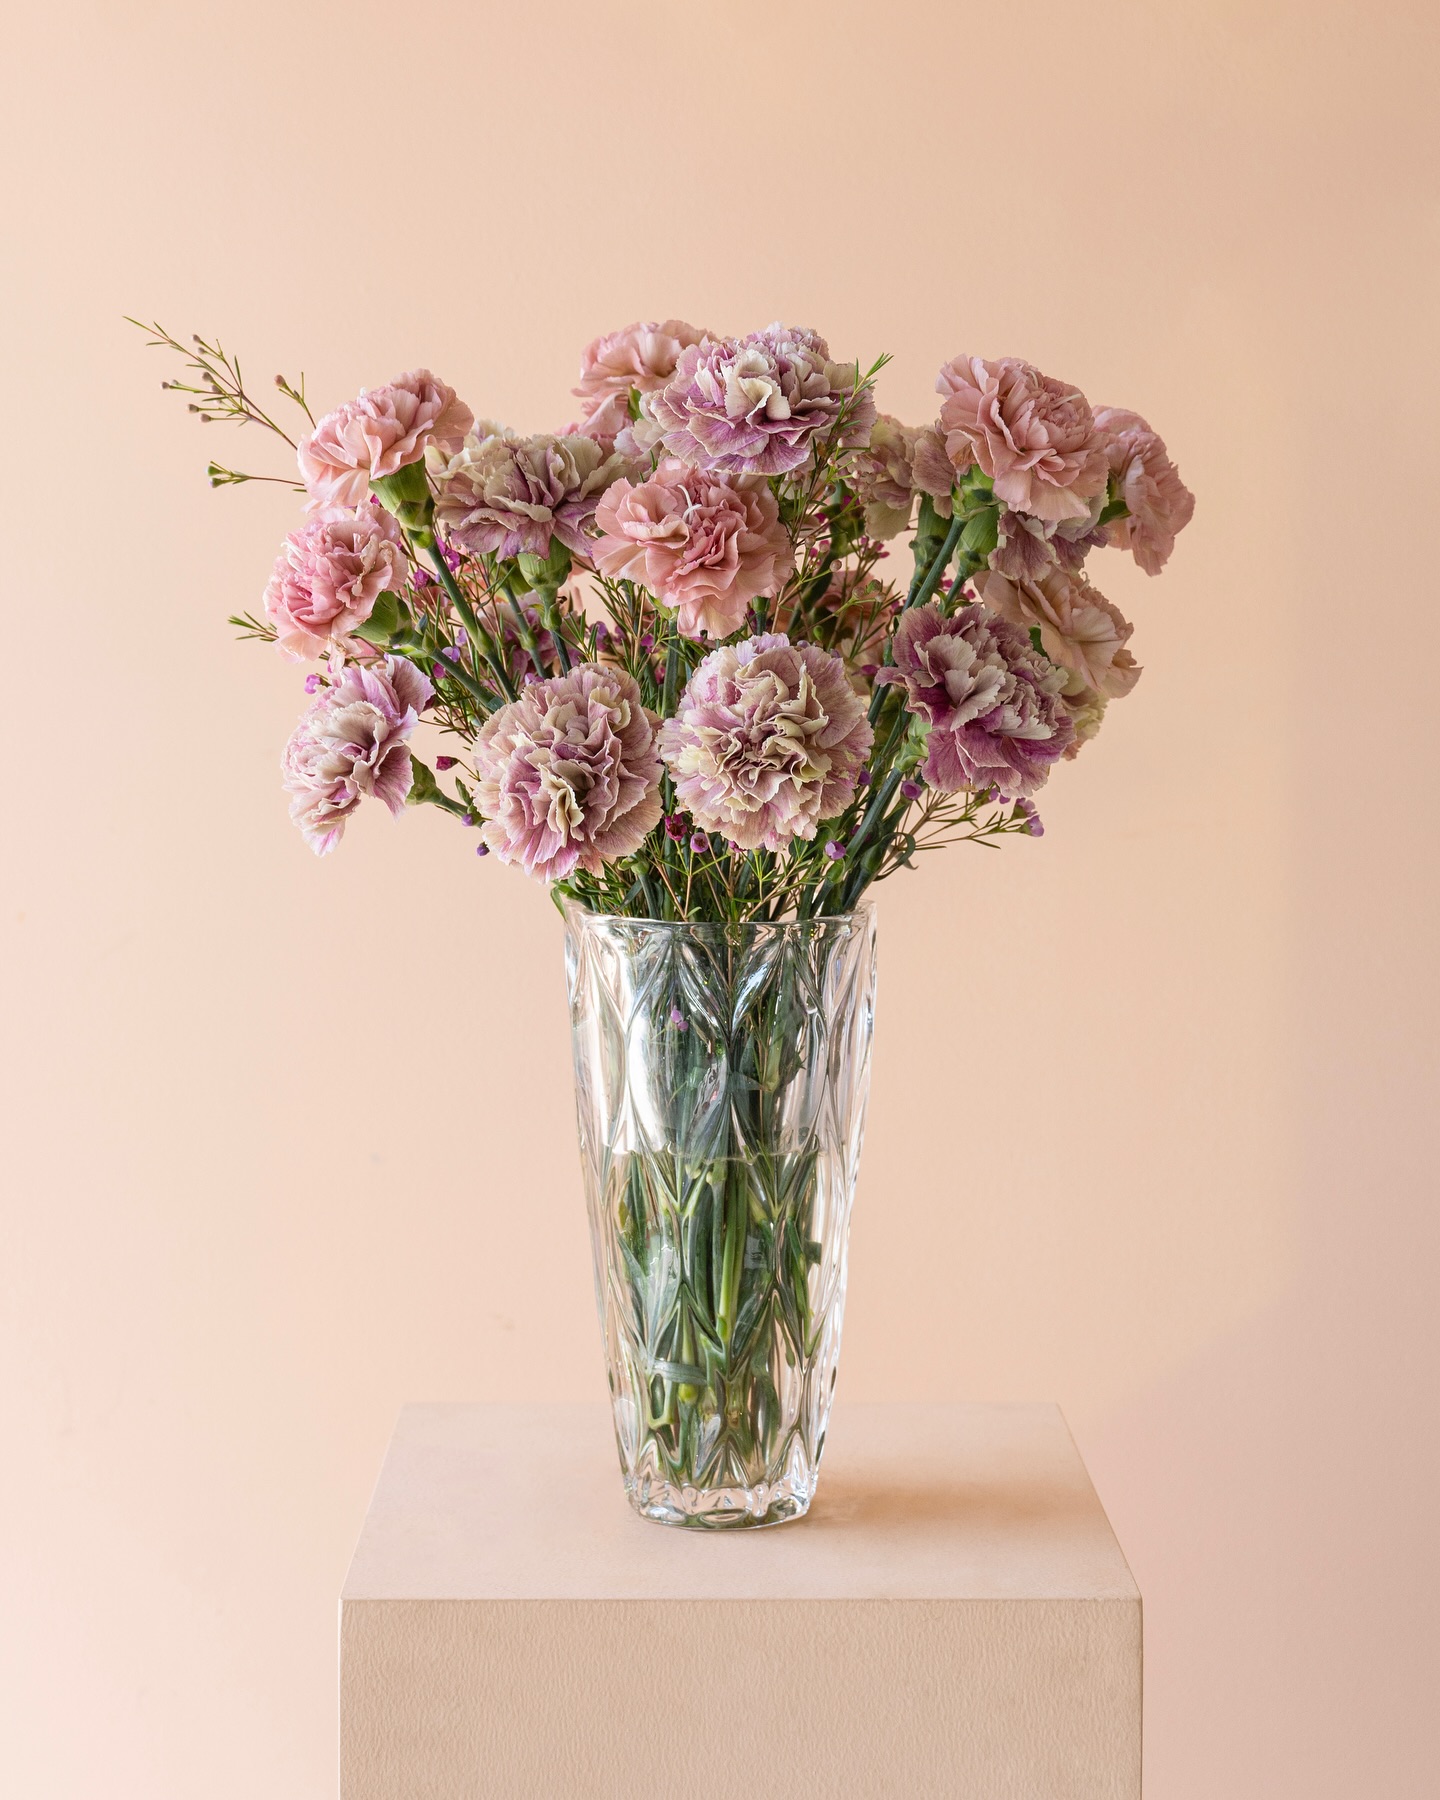 Currently in-love with this delicate arrangement of dusty pink carnations beautifully arranged in a crystal vase 🪷💗 Order yours now!

#AliaFlowers